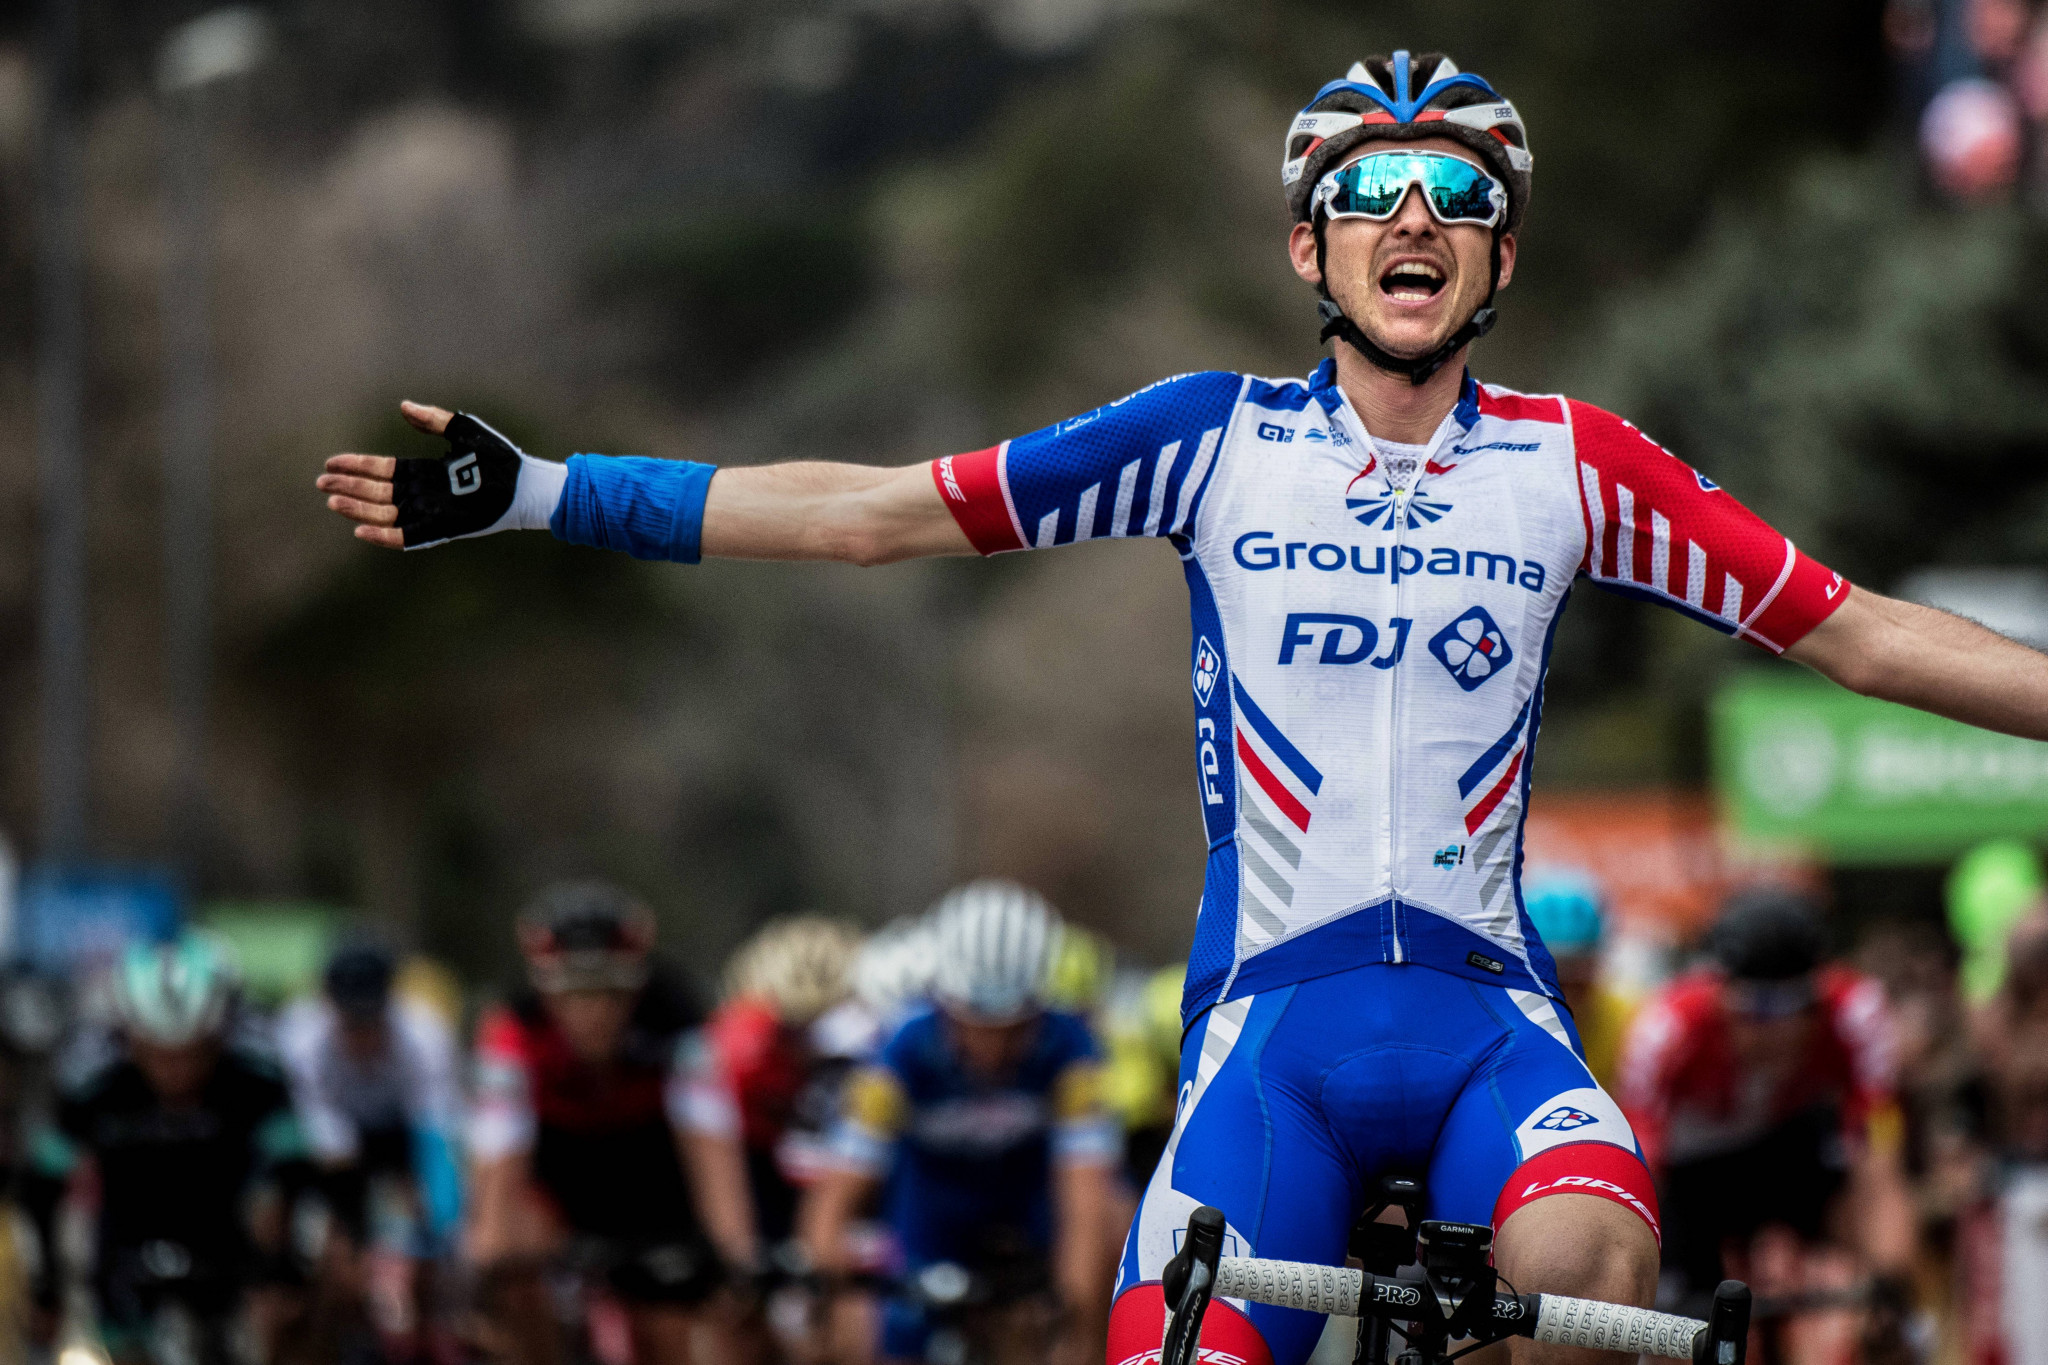 Molard wins stage six of Paris-Nice after late attack